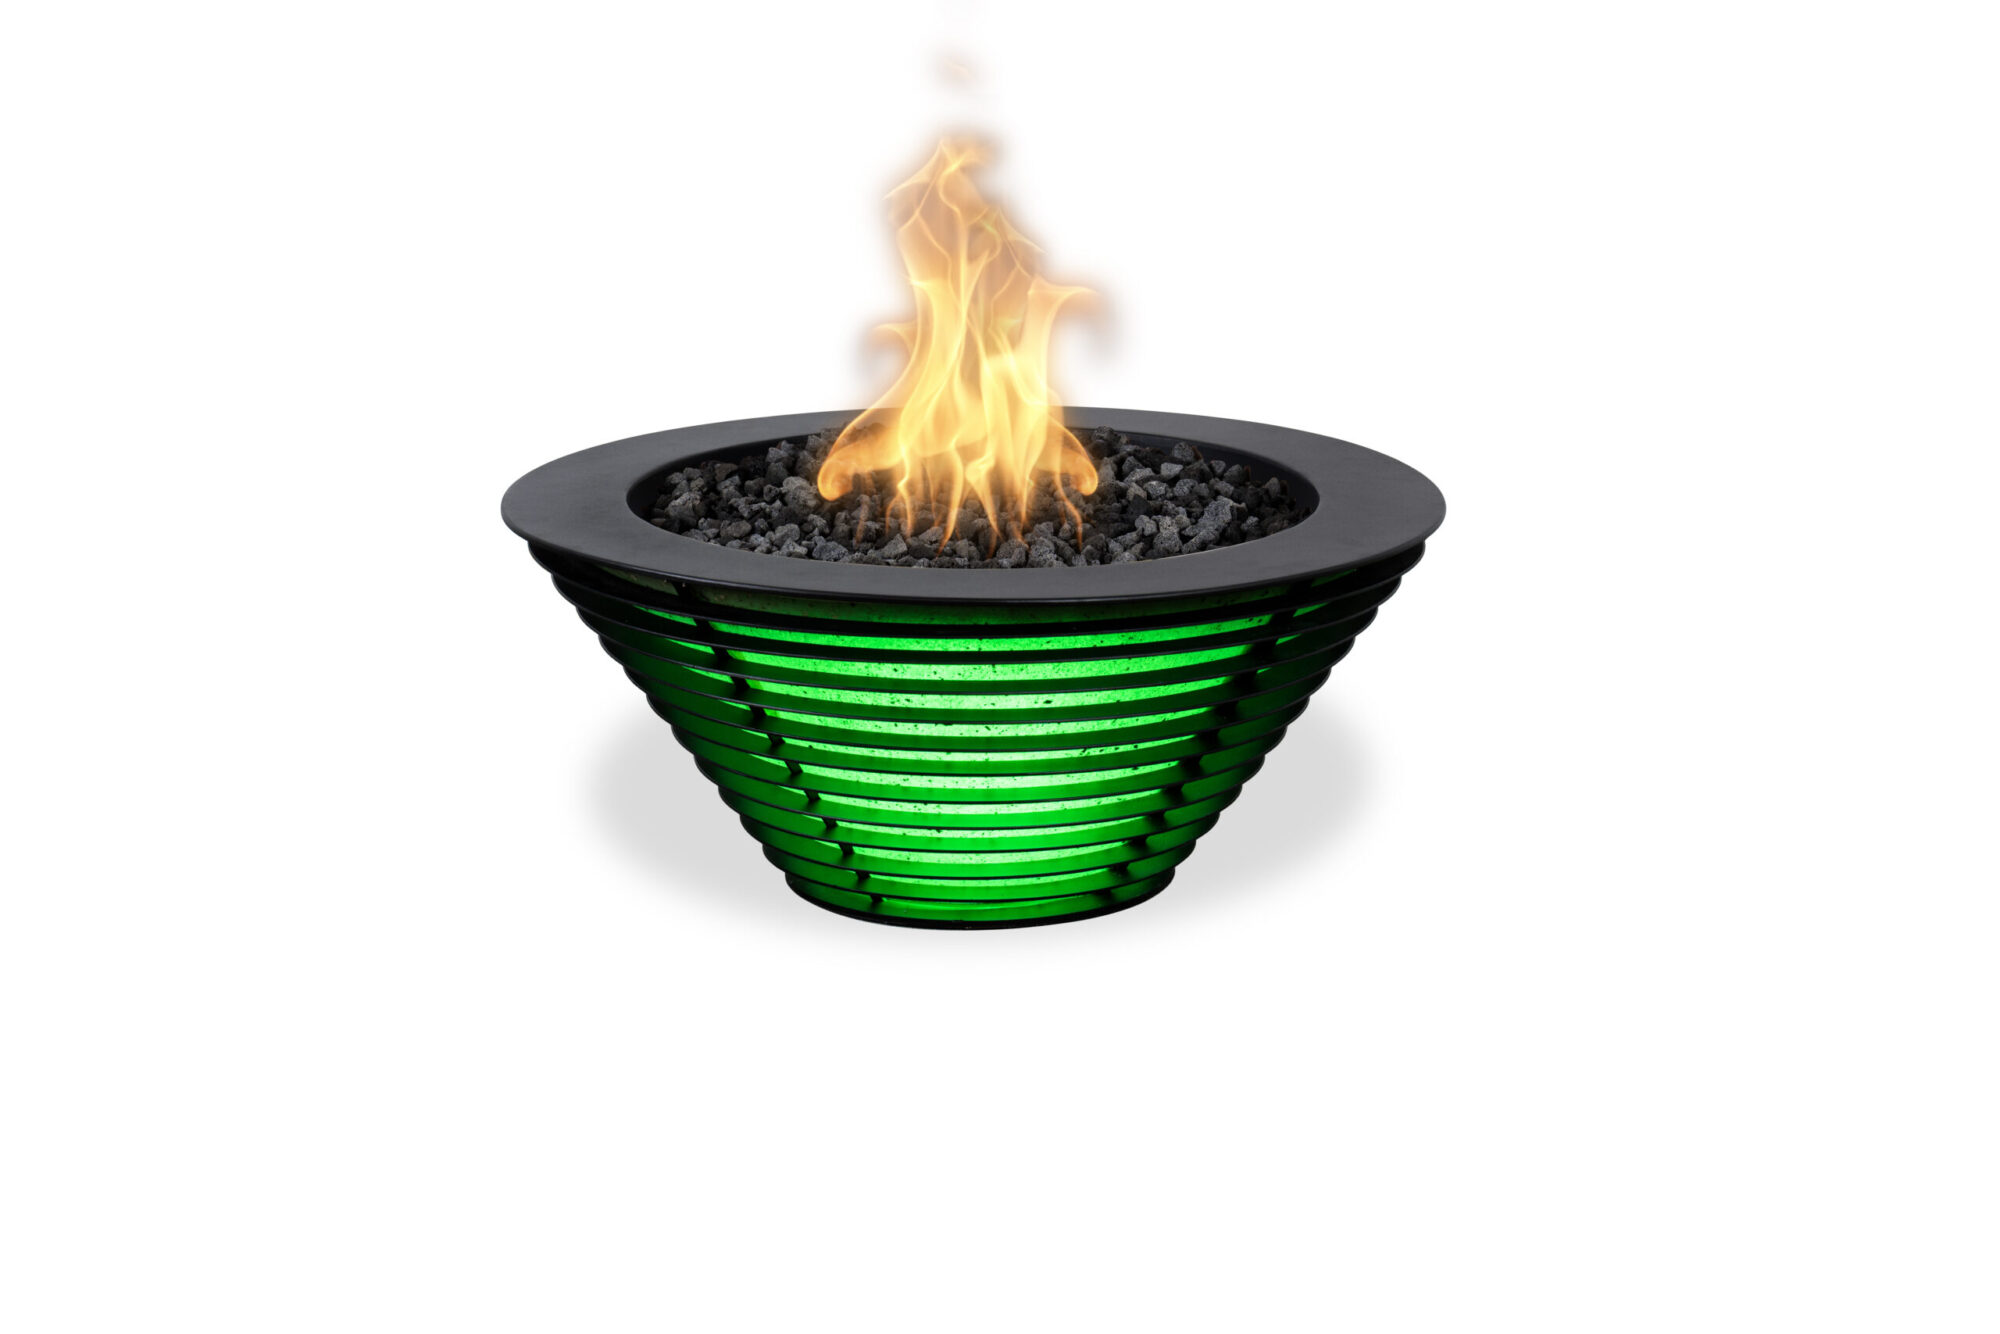 Lighthouse Series Mayport LED Fire Bowl - Green